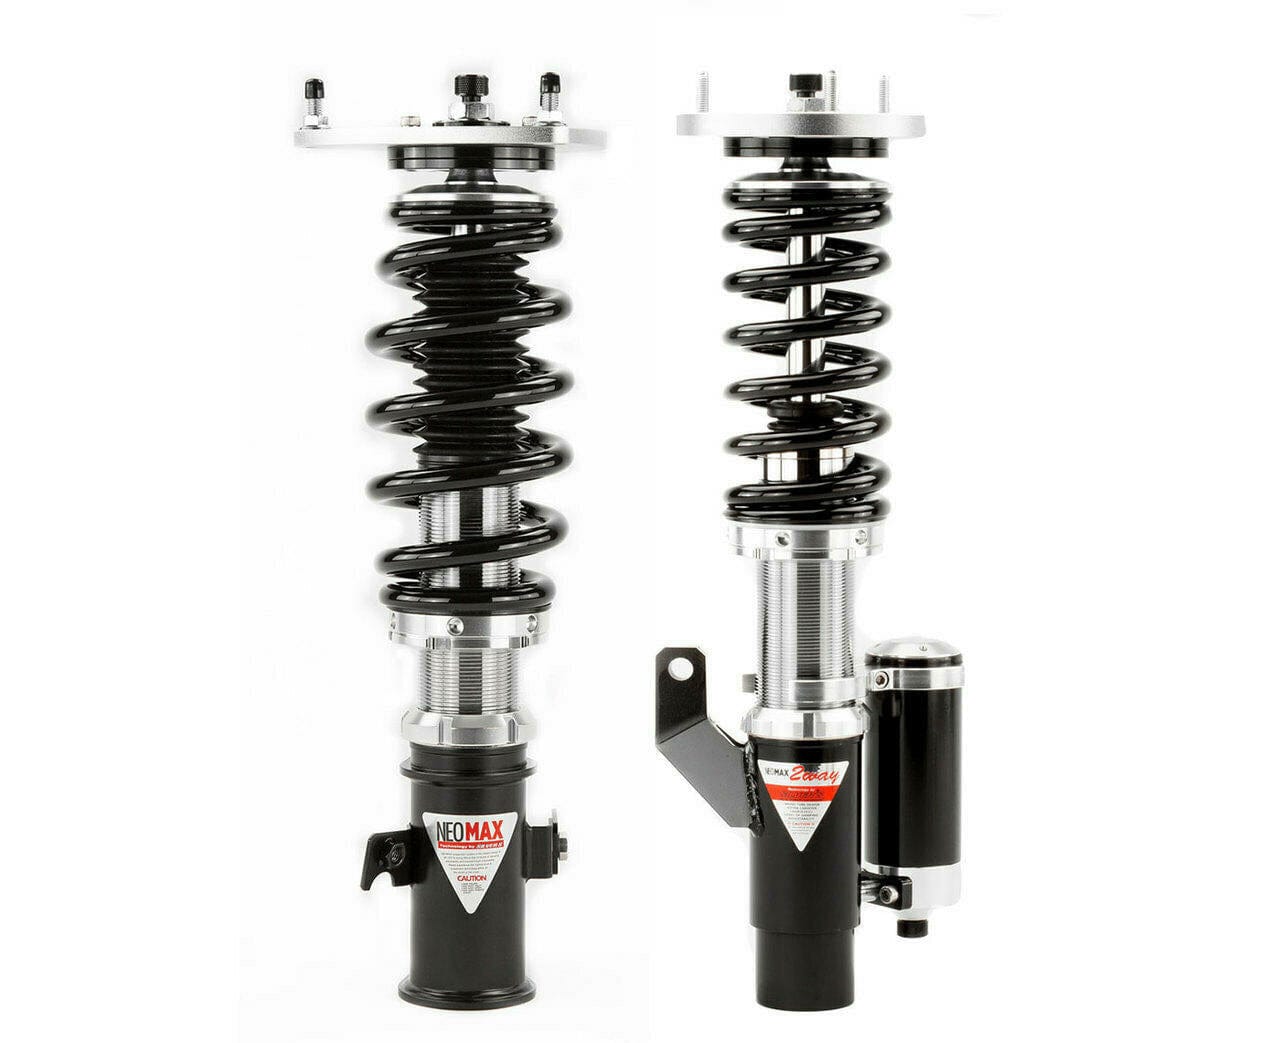 Silvers NEOMAX 2-Way Coilovers for 2005-2008 Volkswagen Golf GTI 2.0L 55mm Front Strut (MK5) SV1006-2W